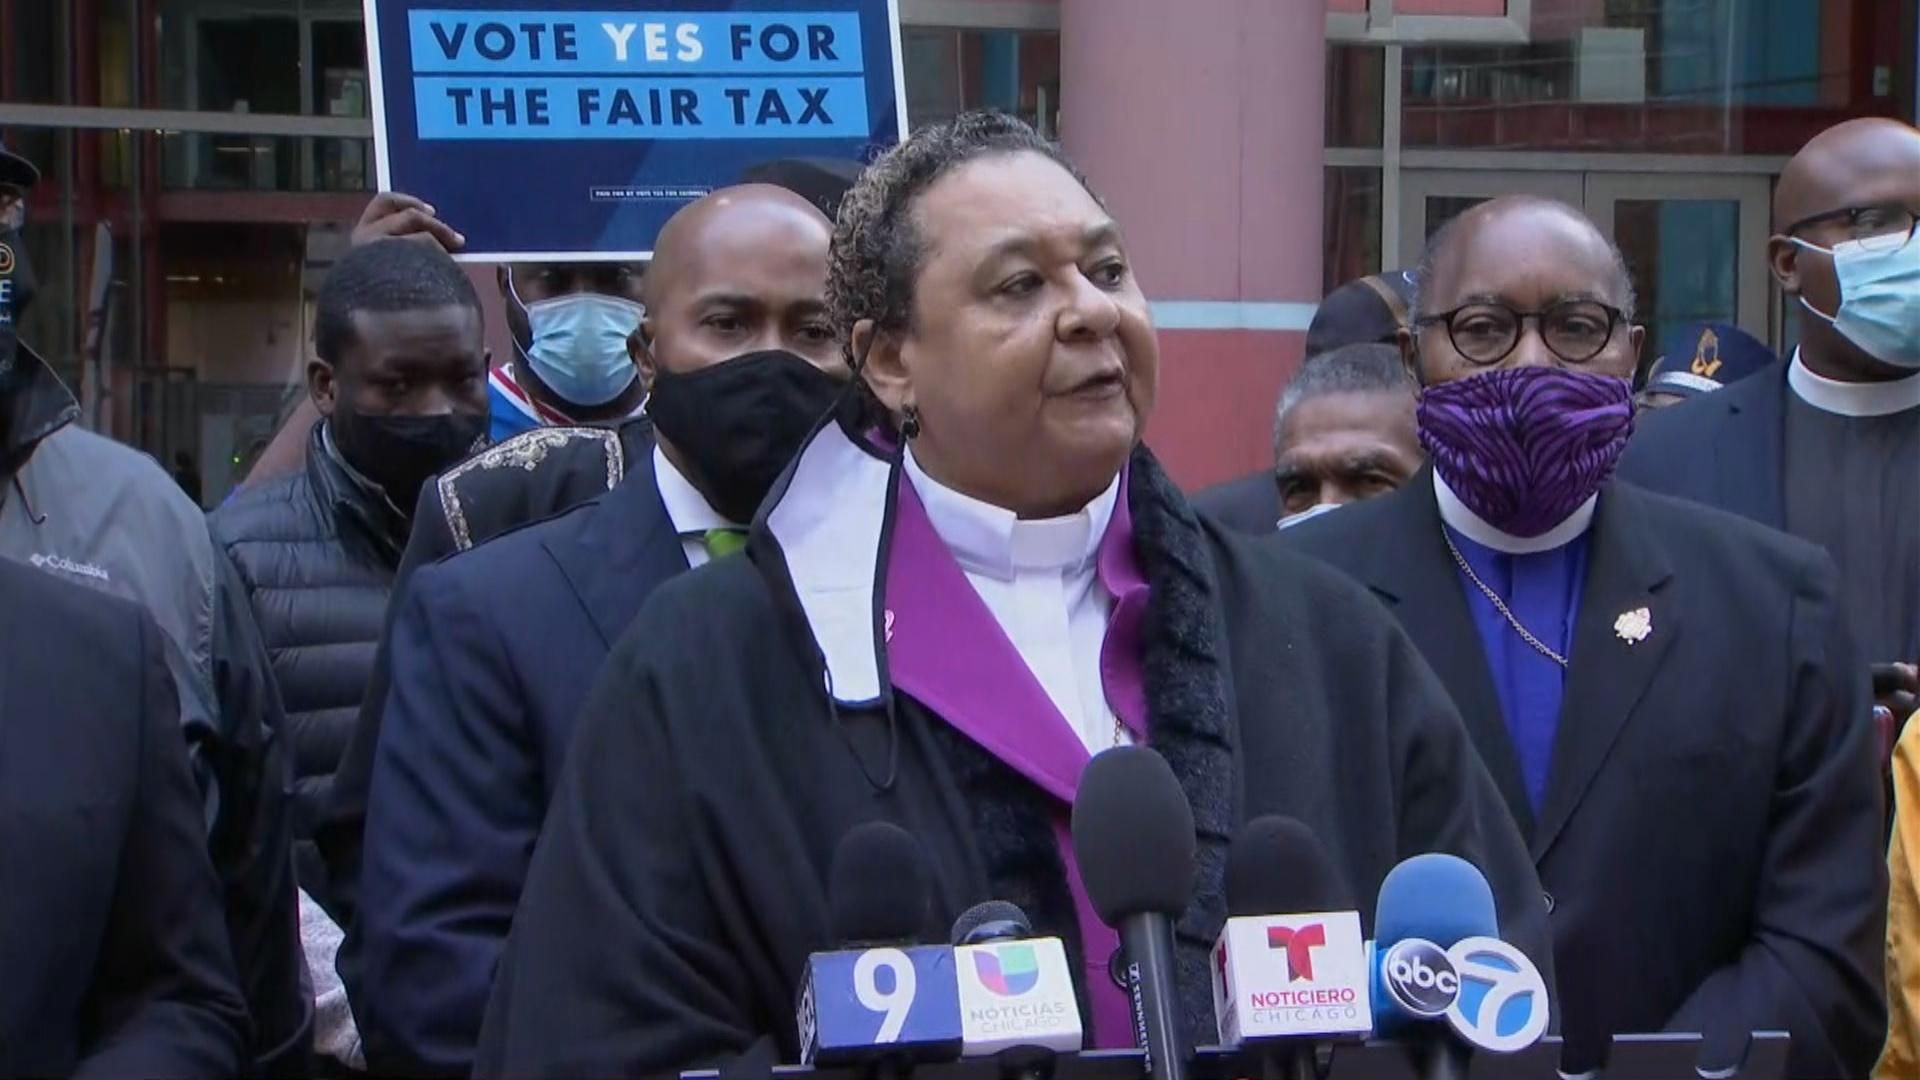 Bishop Shirley Coleman of the Spiritual Wholistic Ministries of Love & Faith gathers with other religious leaders on Tuesday, Oct. 6, 2020 to promote the “fair tax” amendment. (WTTW News)